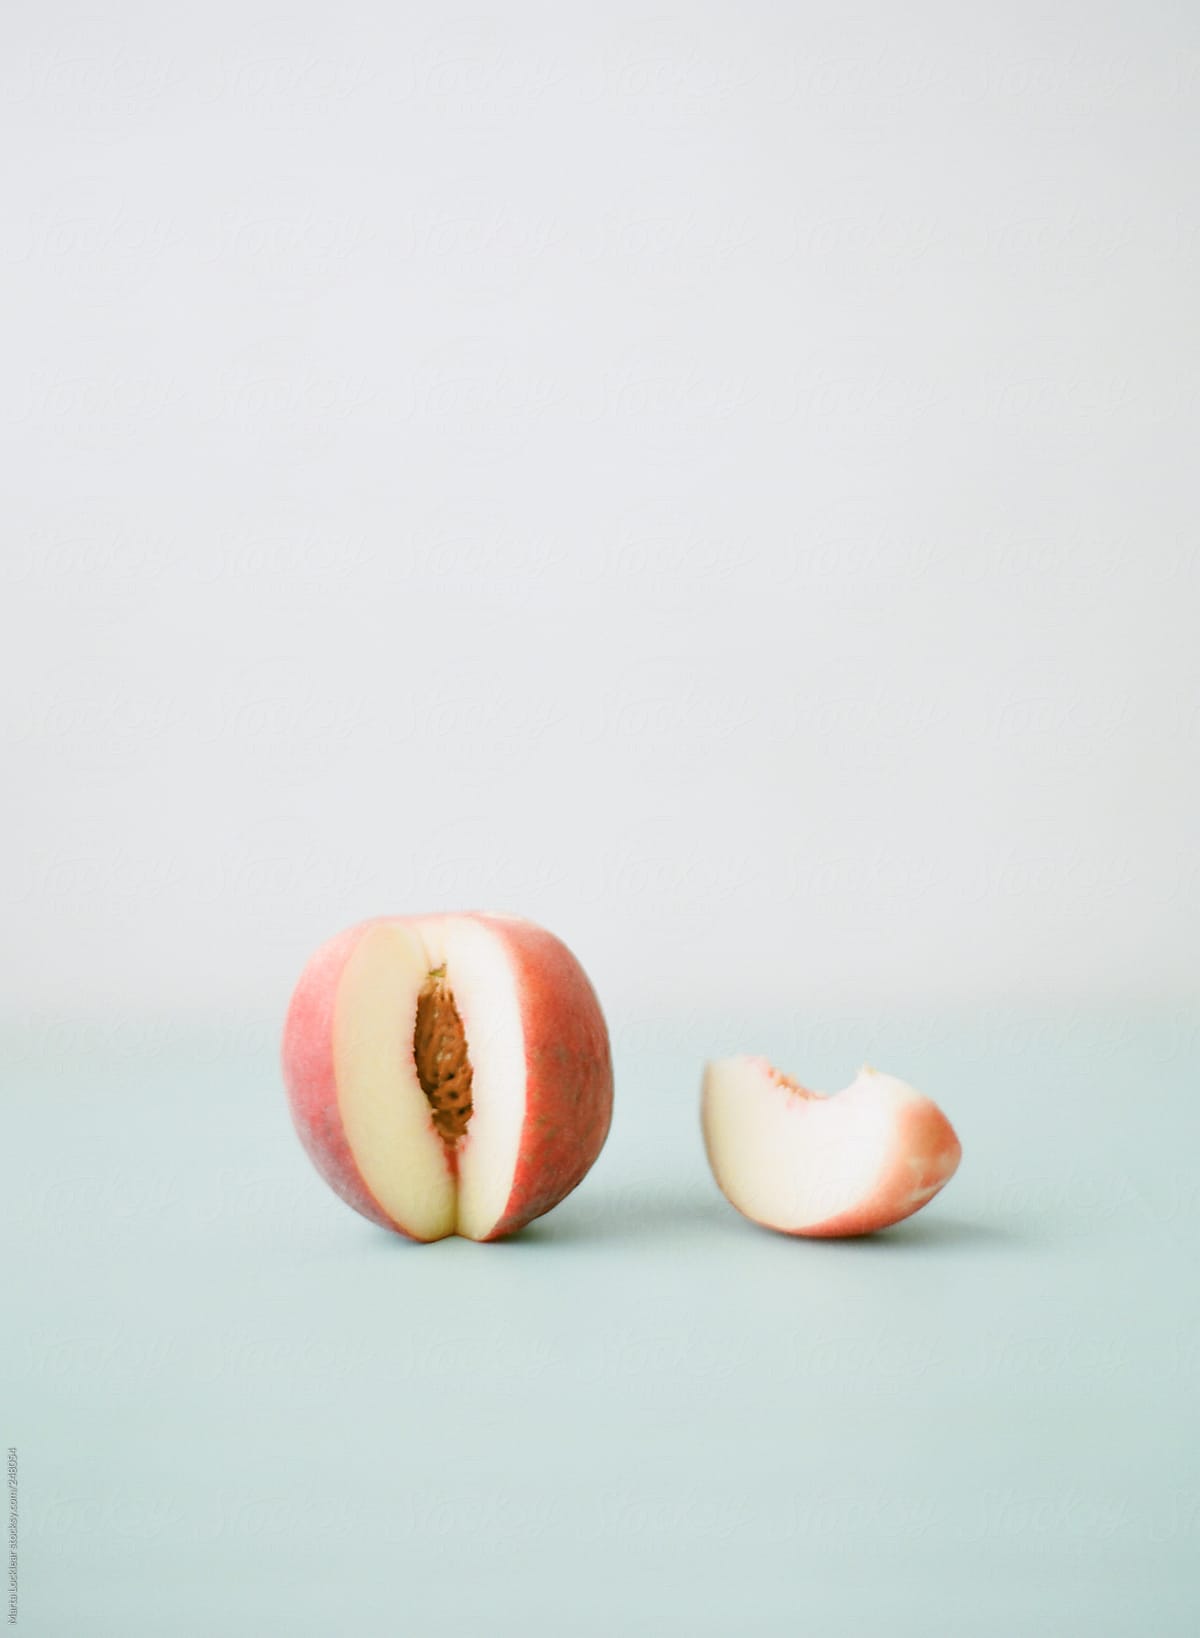 Organic white peach with a single slice taken out